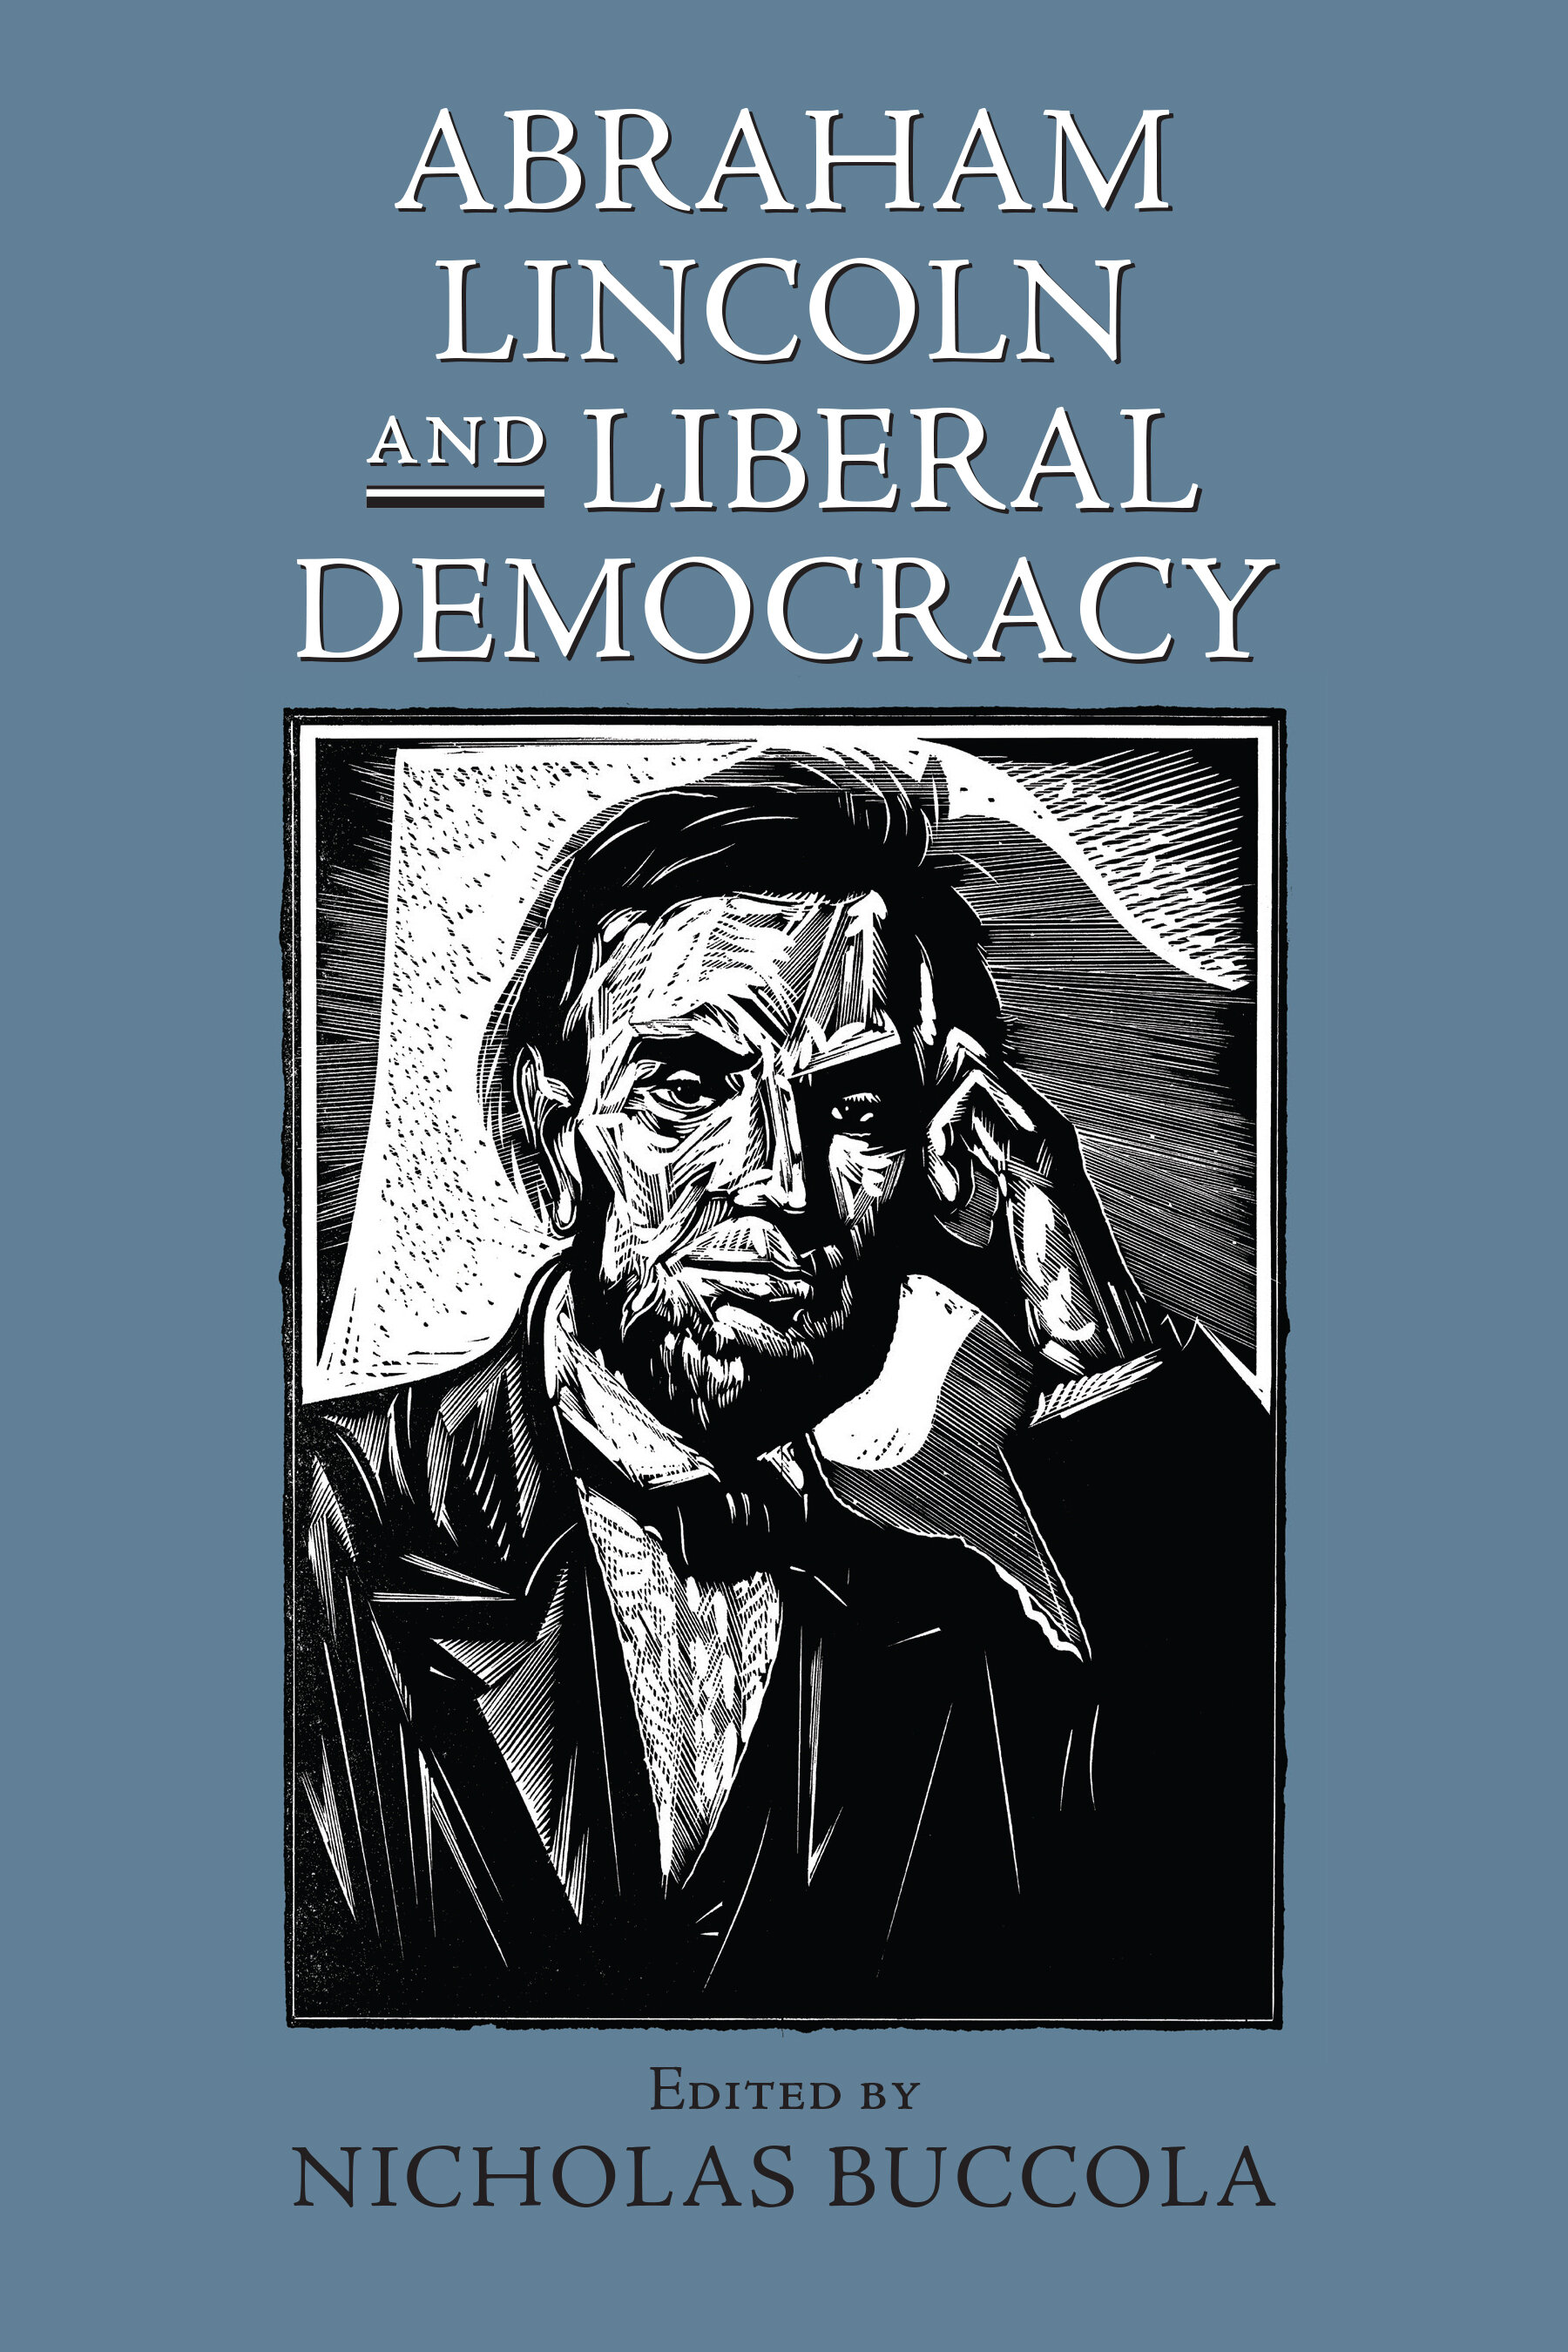  Preview This Book Abraham Lincoln and Liberal Democracy Edited by Nicholas Buccola